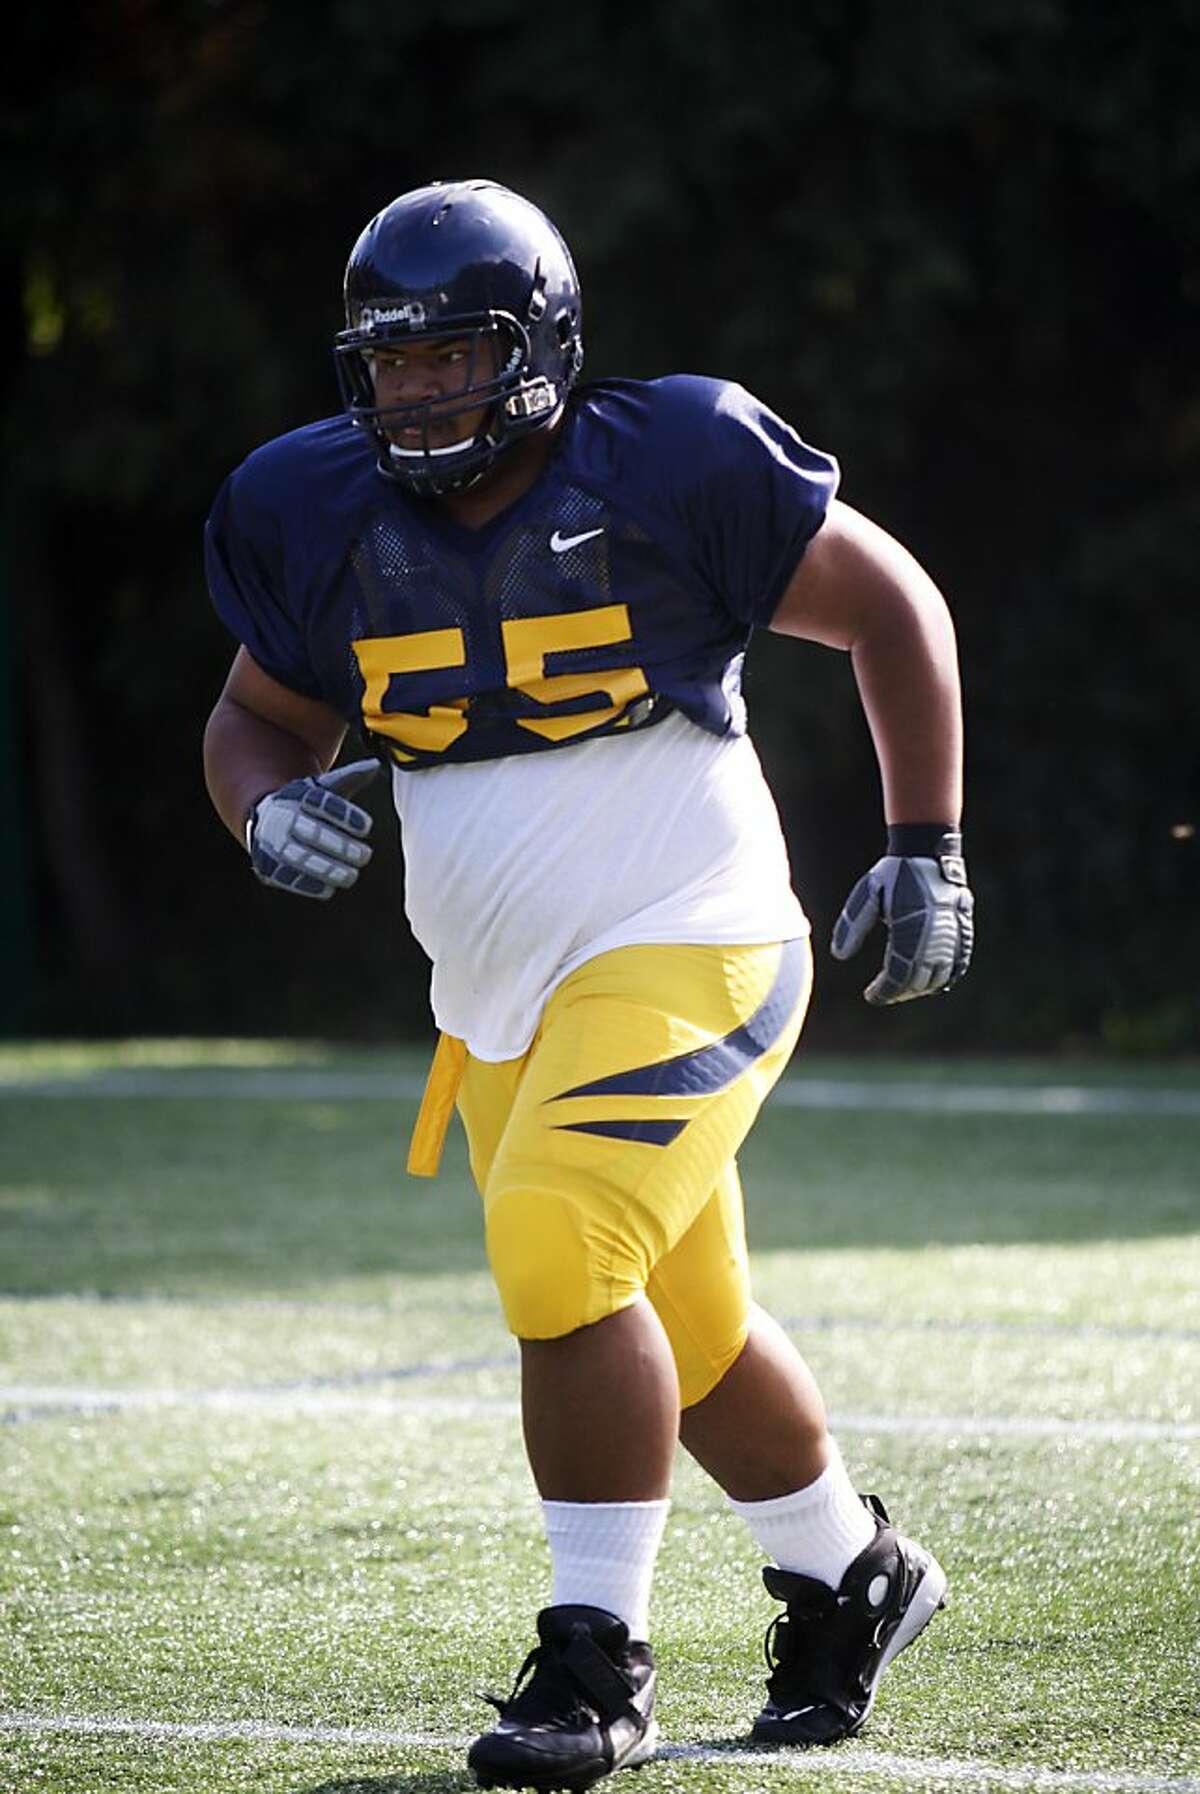 Number 55 Viliami Moala practices with the Cal Bears football team on Witter Rugby Field above Cal Campus on Wednesday, August 10, 2011 in Berkeley, Calif.